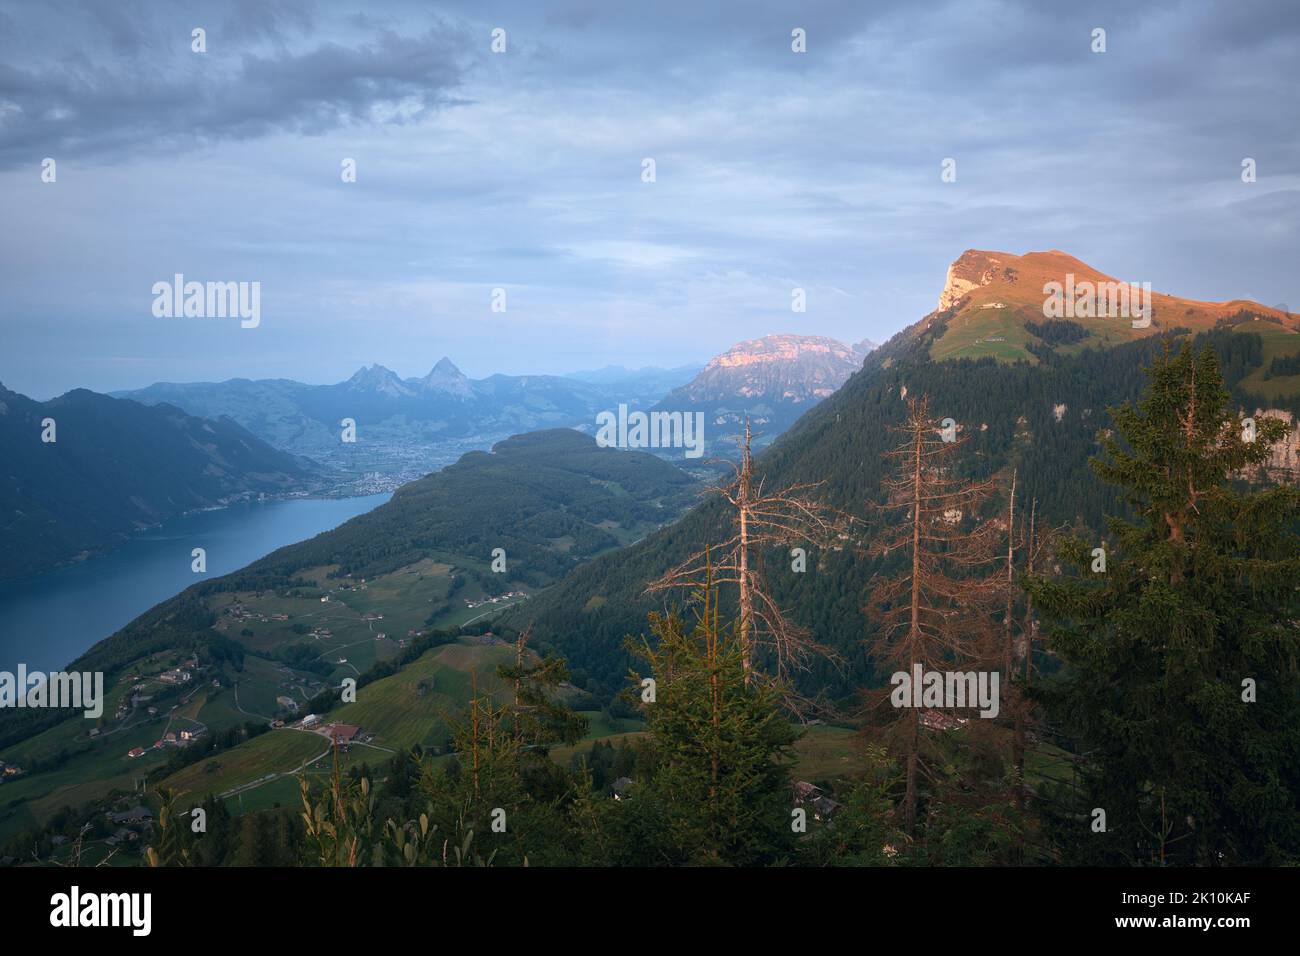 Beautiful summer view of Lake Lucerne (Vierwaldstattersee) and the mountain peaks illuminated by the rising sun. Swiss Alps, Switzerland  Stock Photo